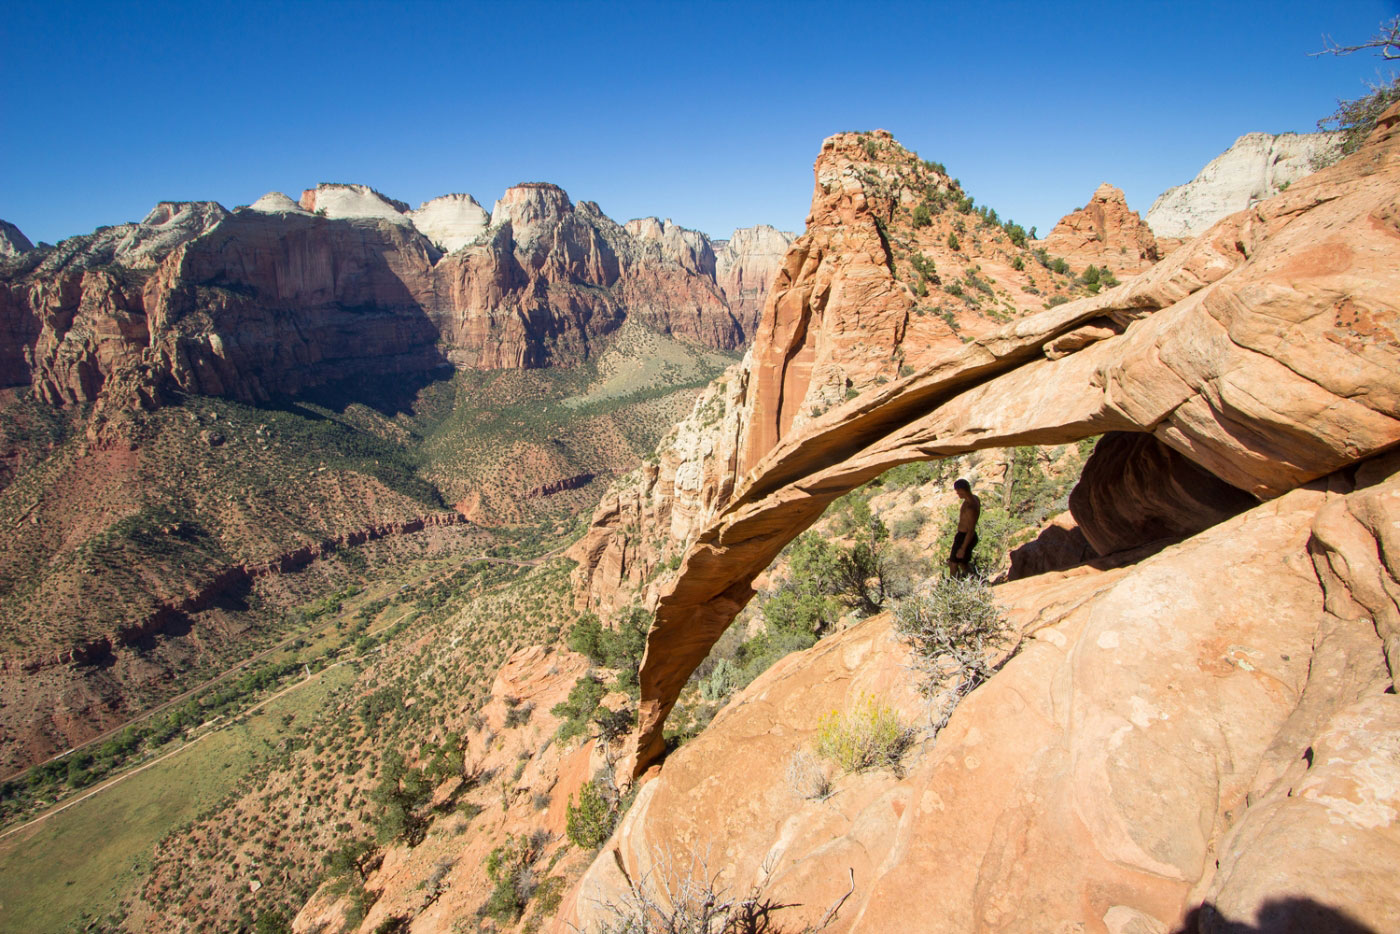 Hike Bridge Mountain and Crawford Arch in Zion National Park, Utah - Stav is Lost